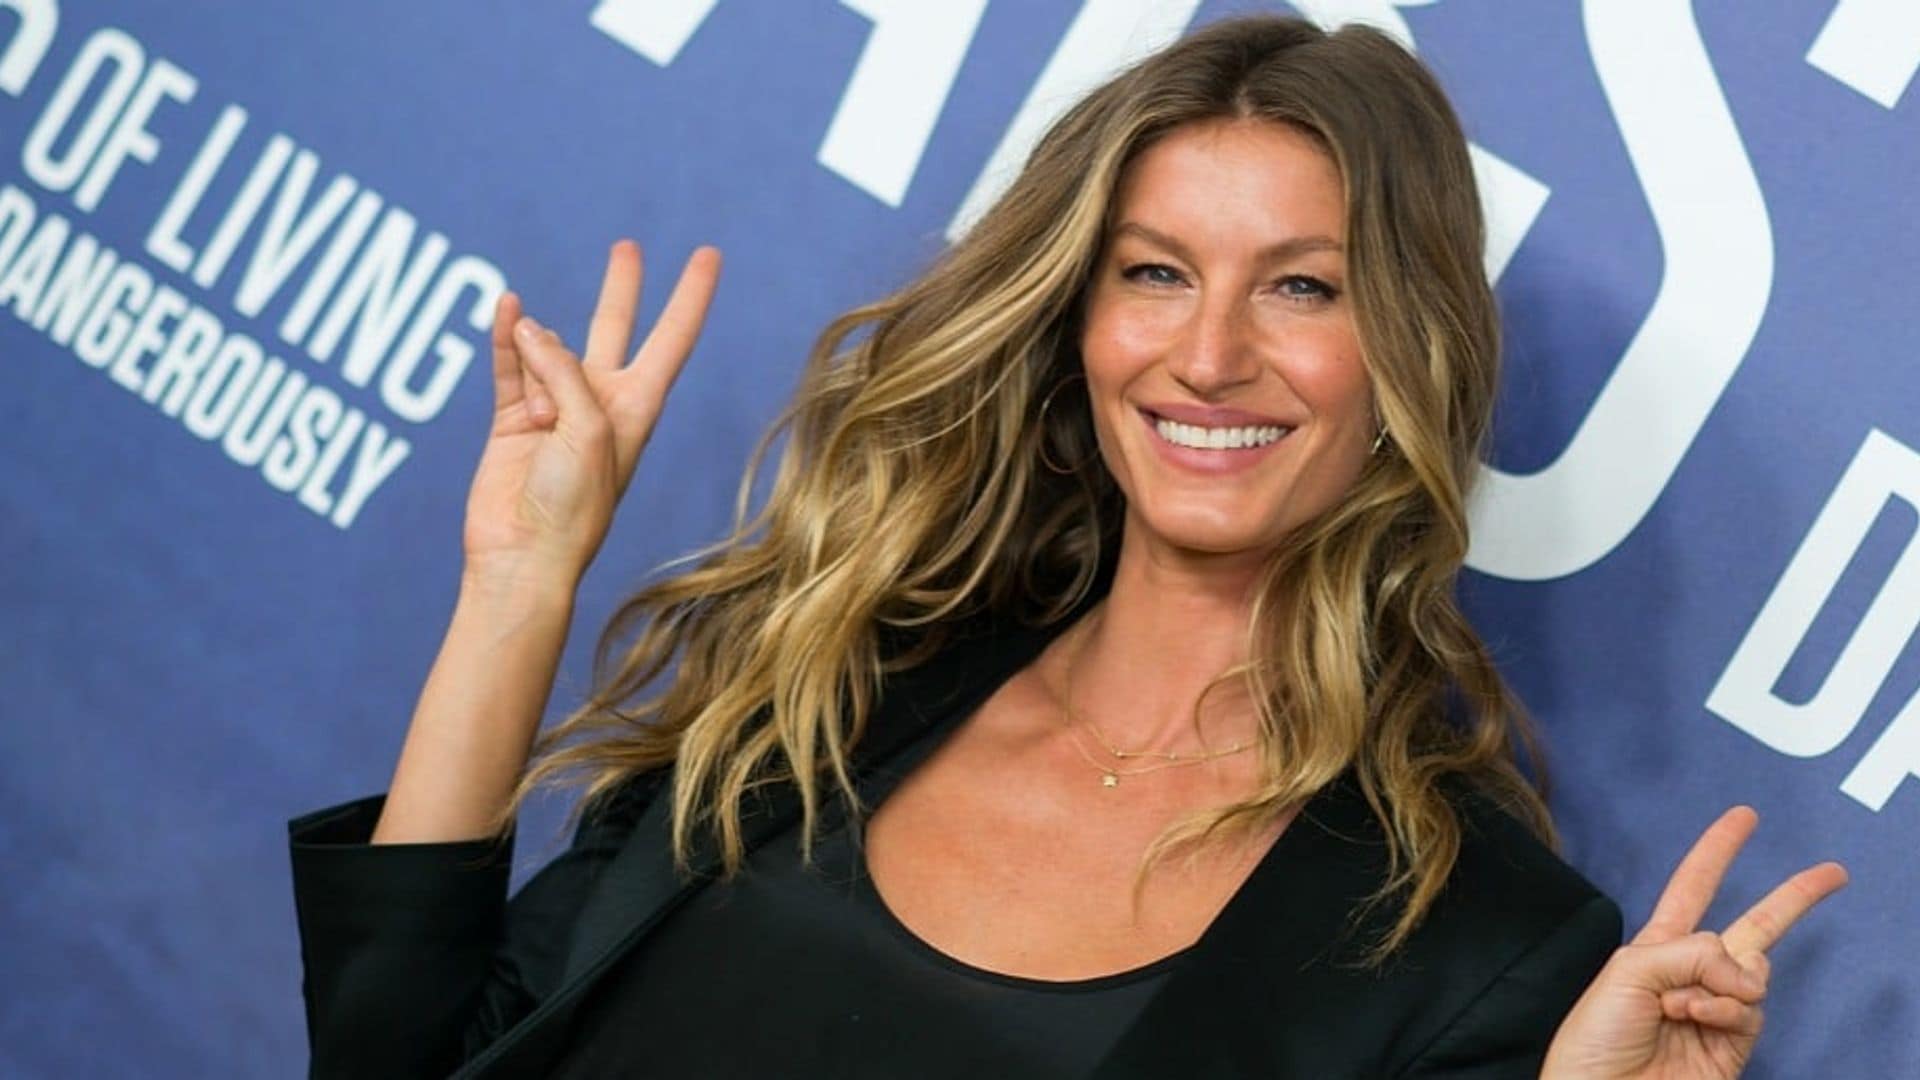 Gisele Bündchen reveals her incredible secret to creating your ideal future